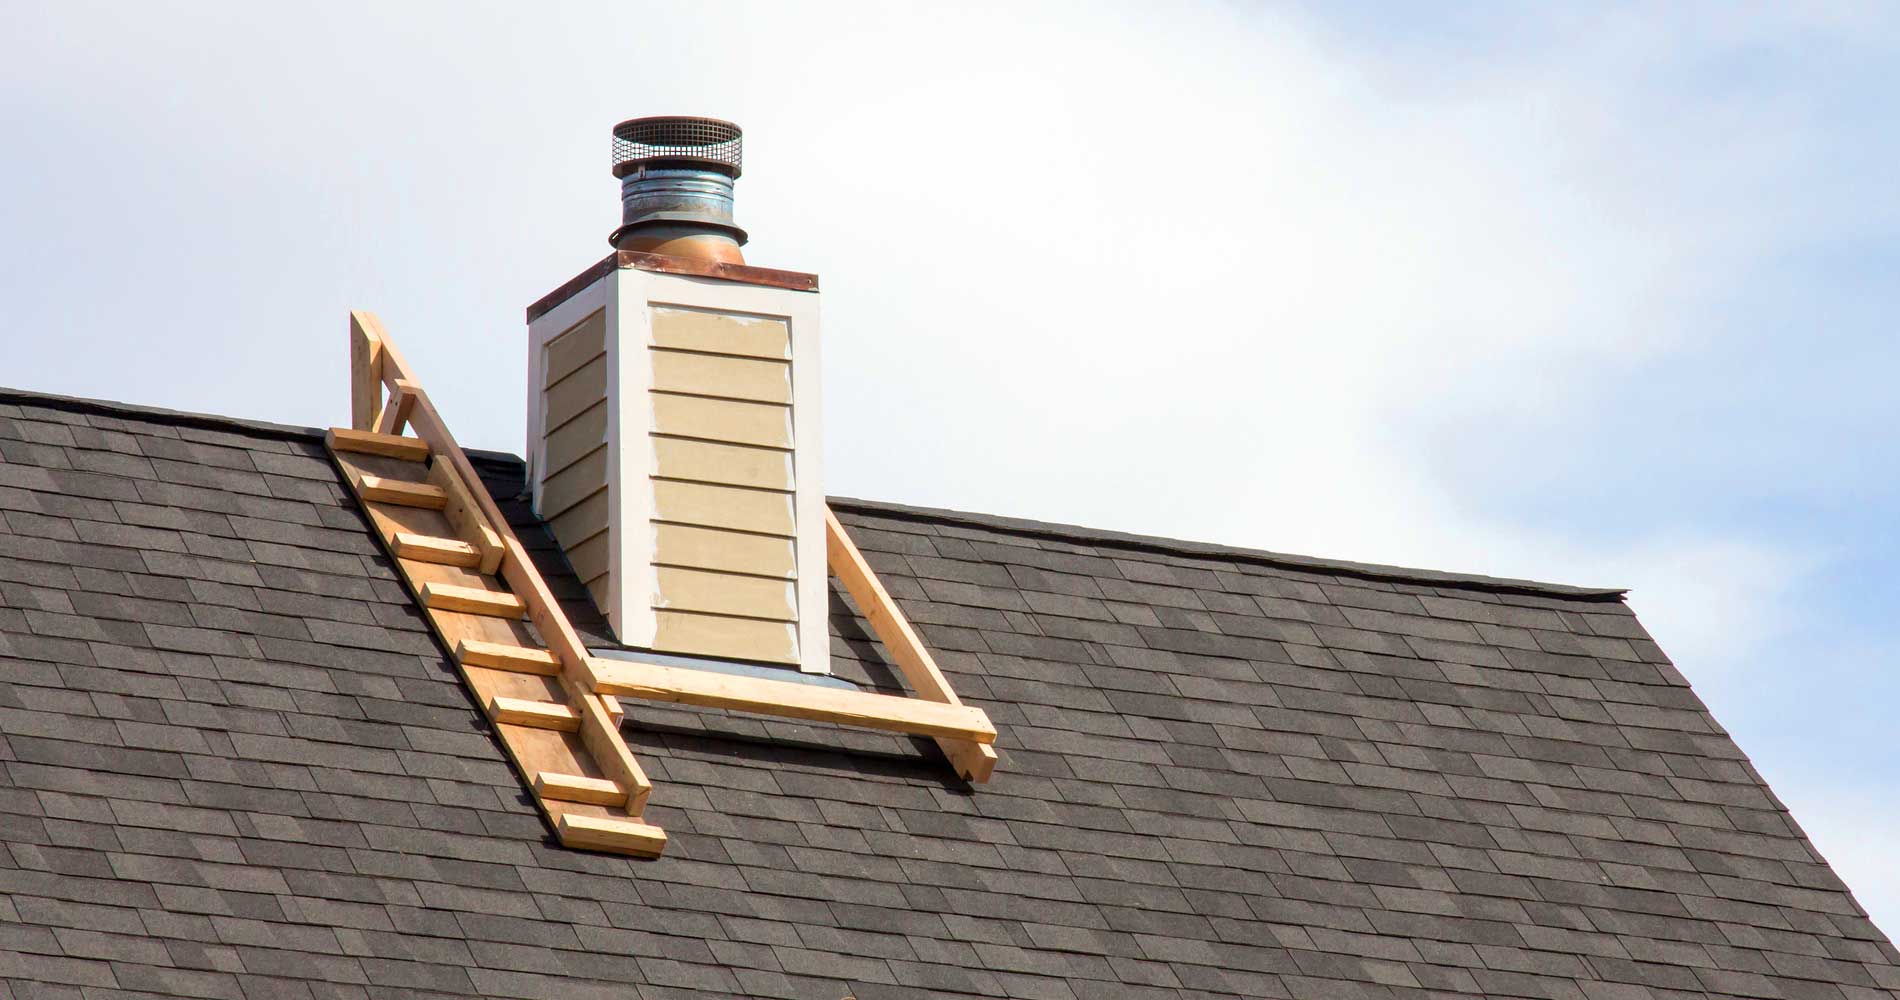 Chimney Repair & Replacement in Scotch Plains, NJ 07076